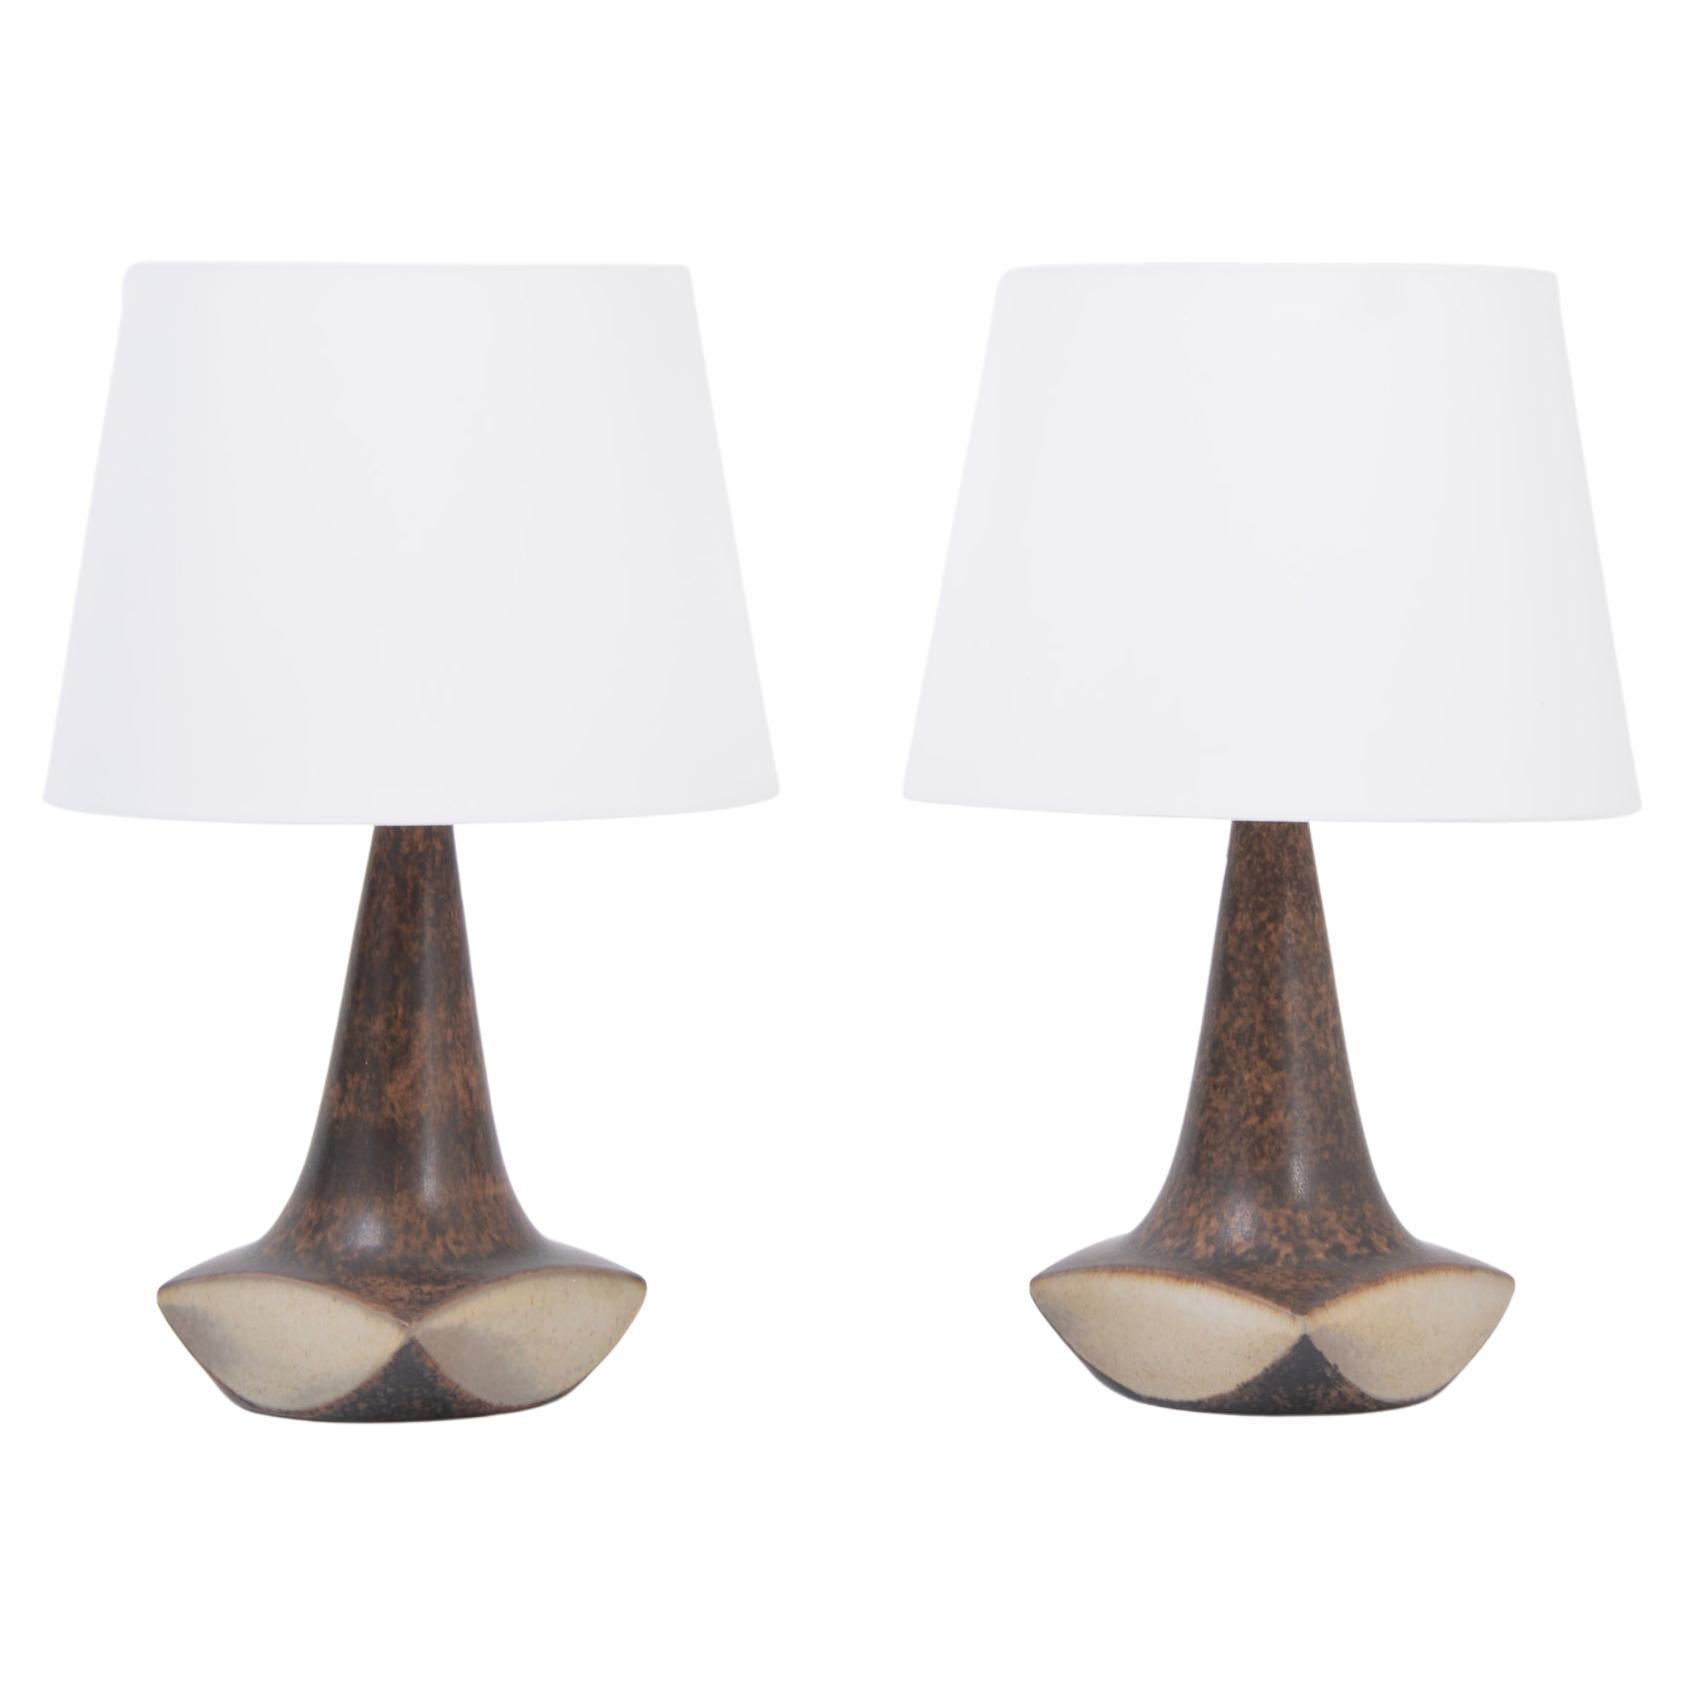 Pair of Danish Midcentury Table Lamps by Marianne Starck for Michael Andersen